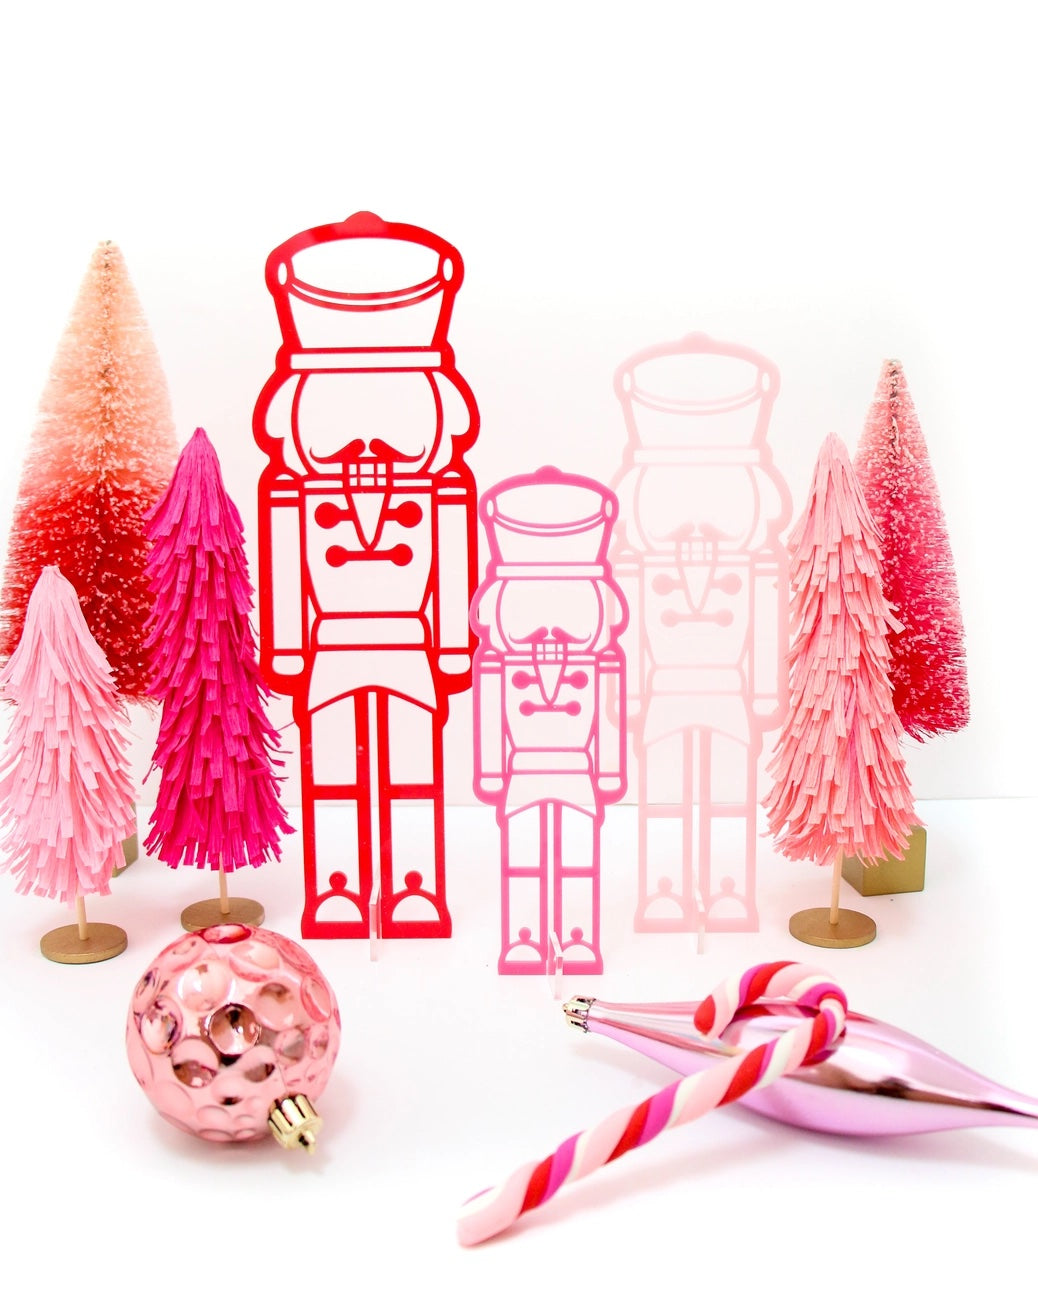 Red and Pink Acrylic Nutcracker Set